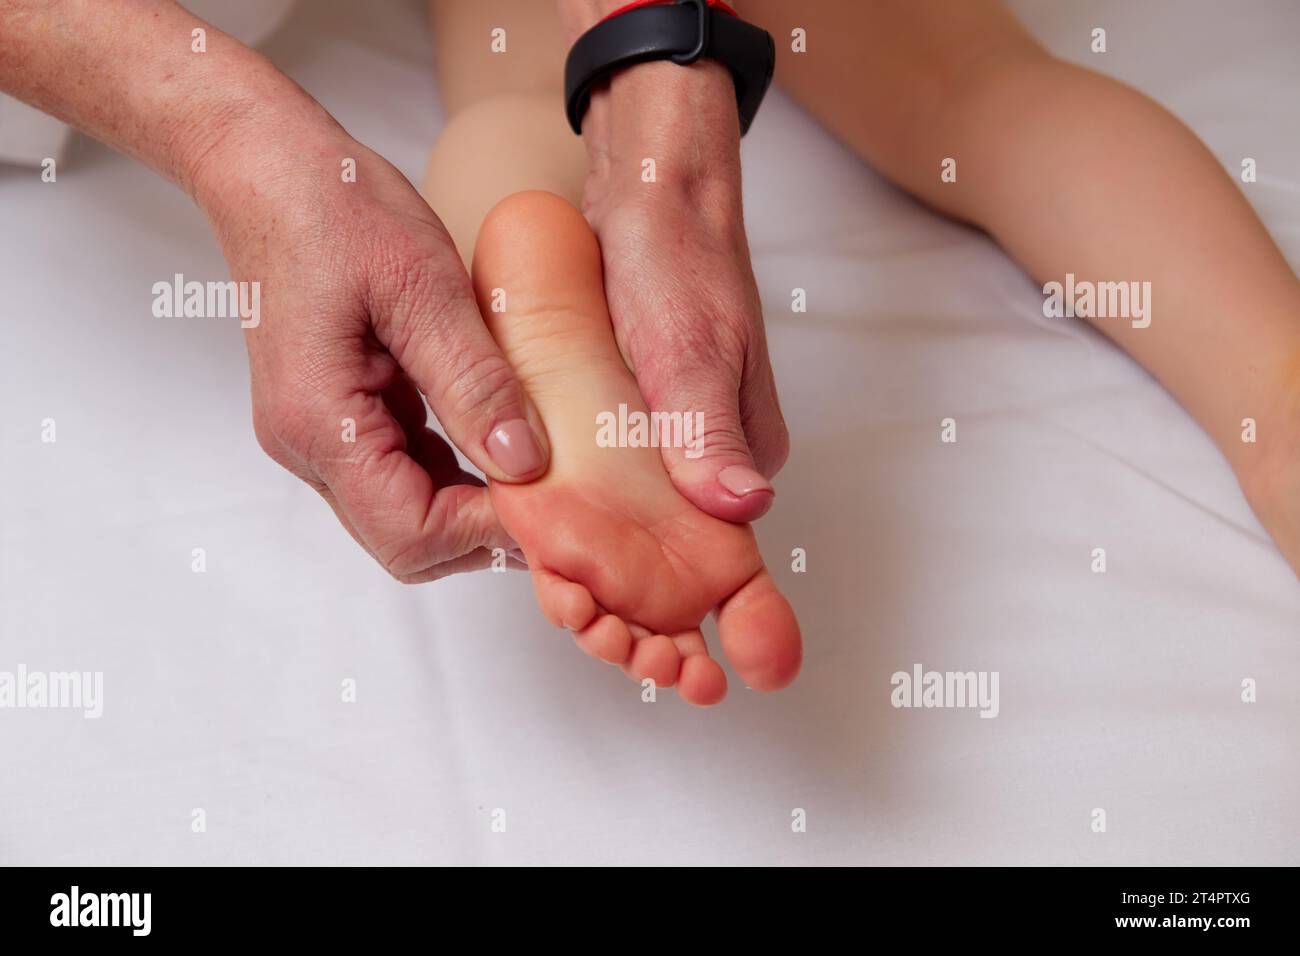 Hands of competent massage therapist massaging foot to child to prevent development of flat feet Stock Photo